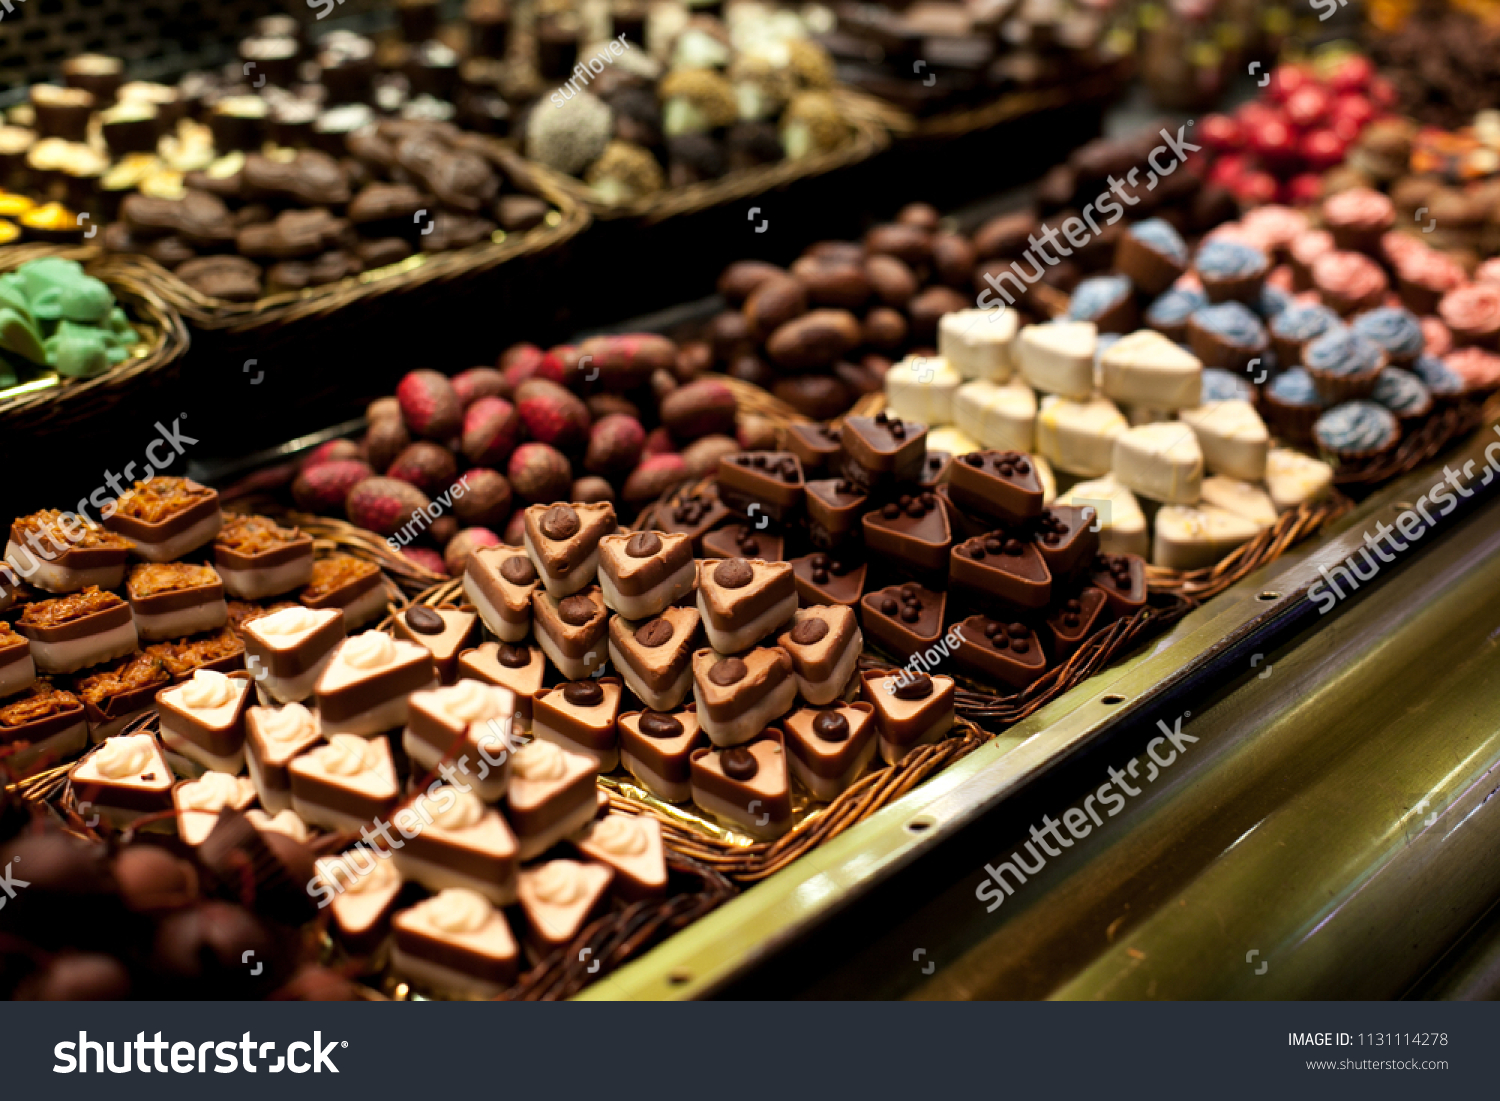 Famous sweet candy market .Confectionery at Boqueria market place in Barcelona, Spain. Assorted chocolate candy shop. #1131114278